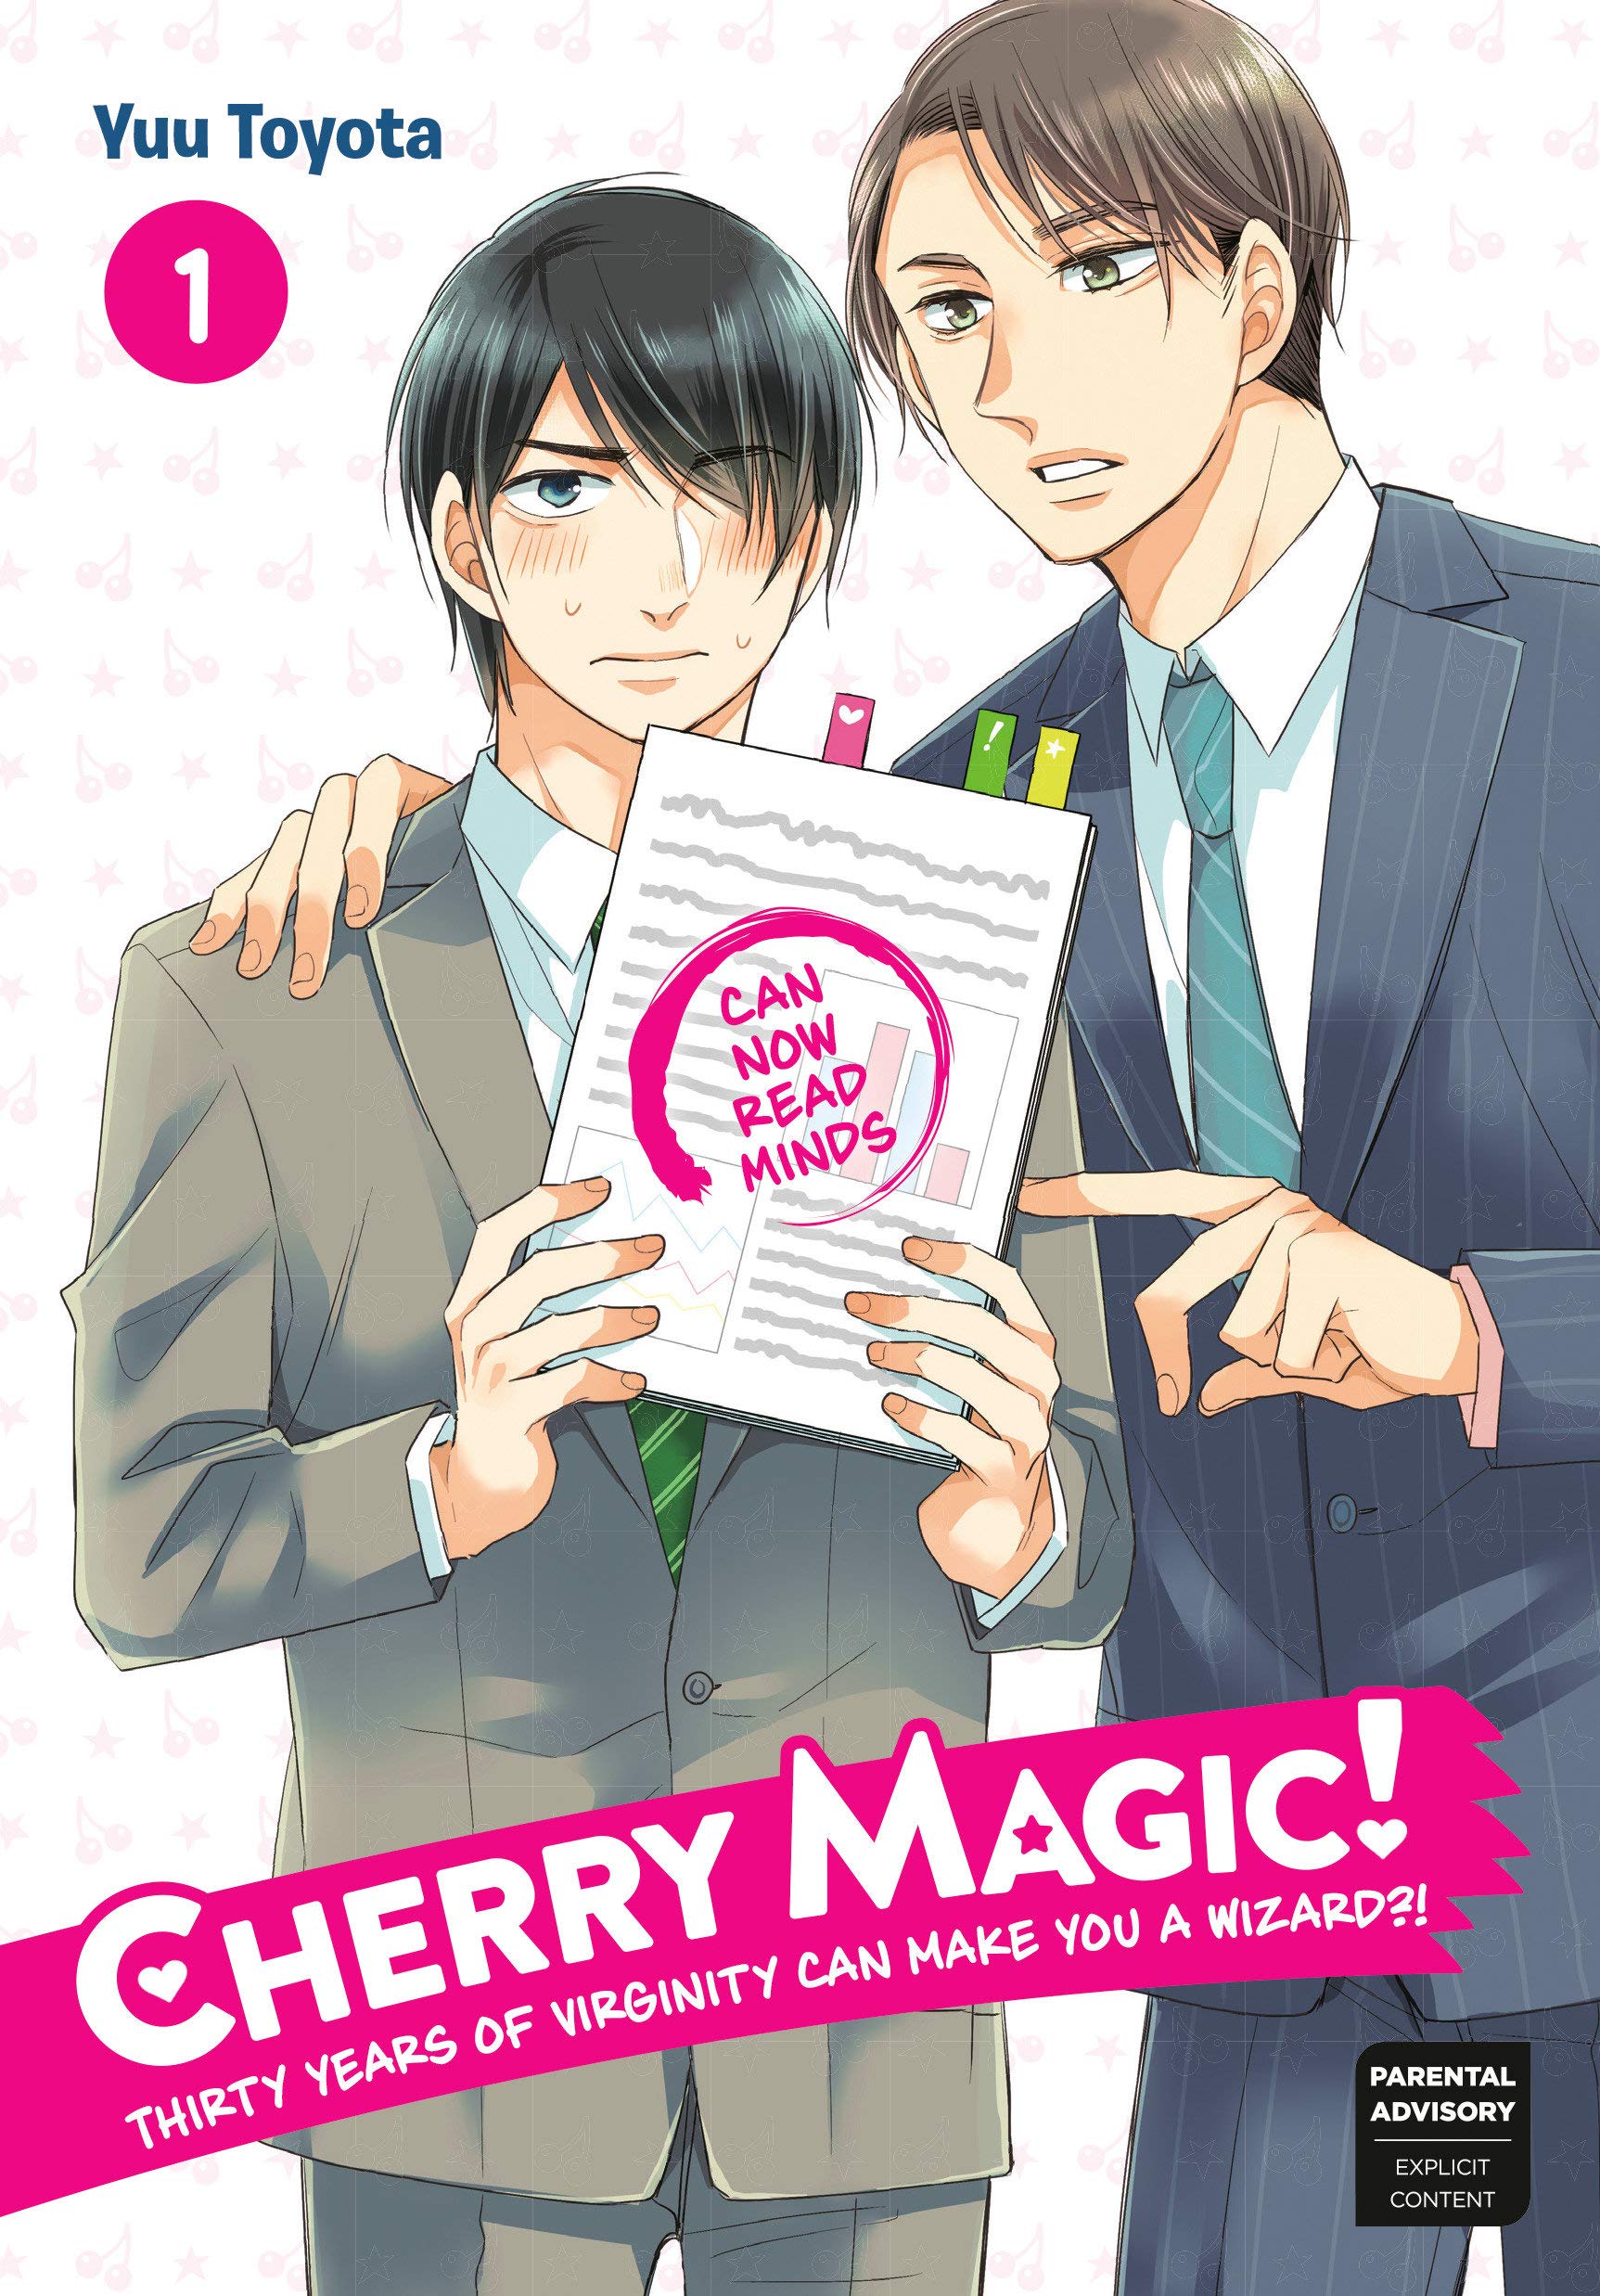 Cherry Magic! Thirty Years Of Virginity Can Make You A Wizard?! - Volume 1